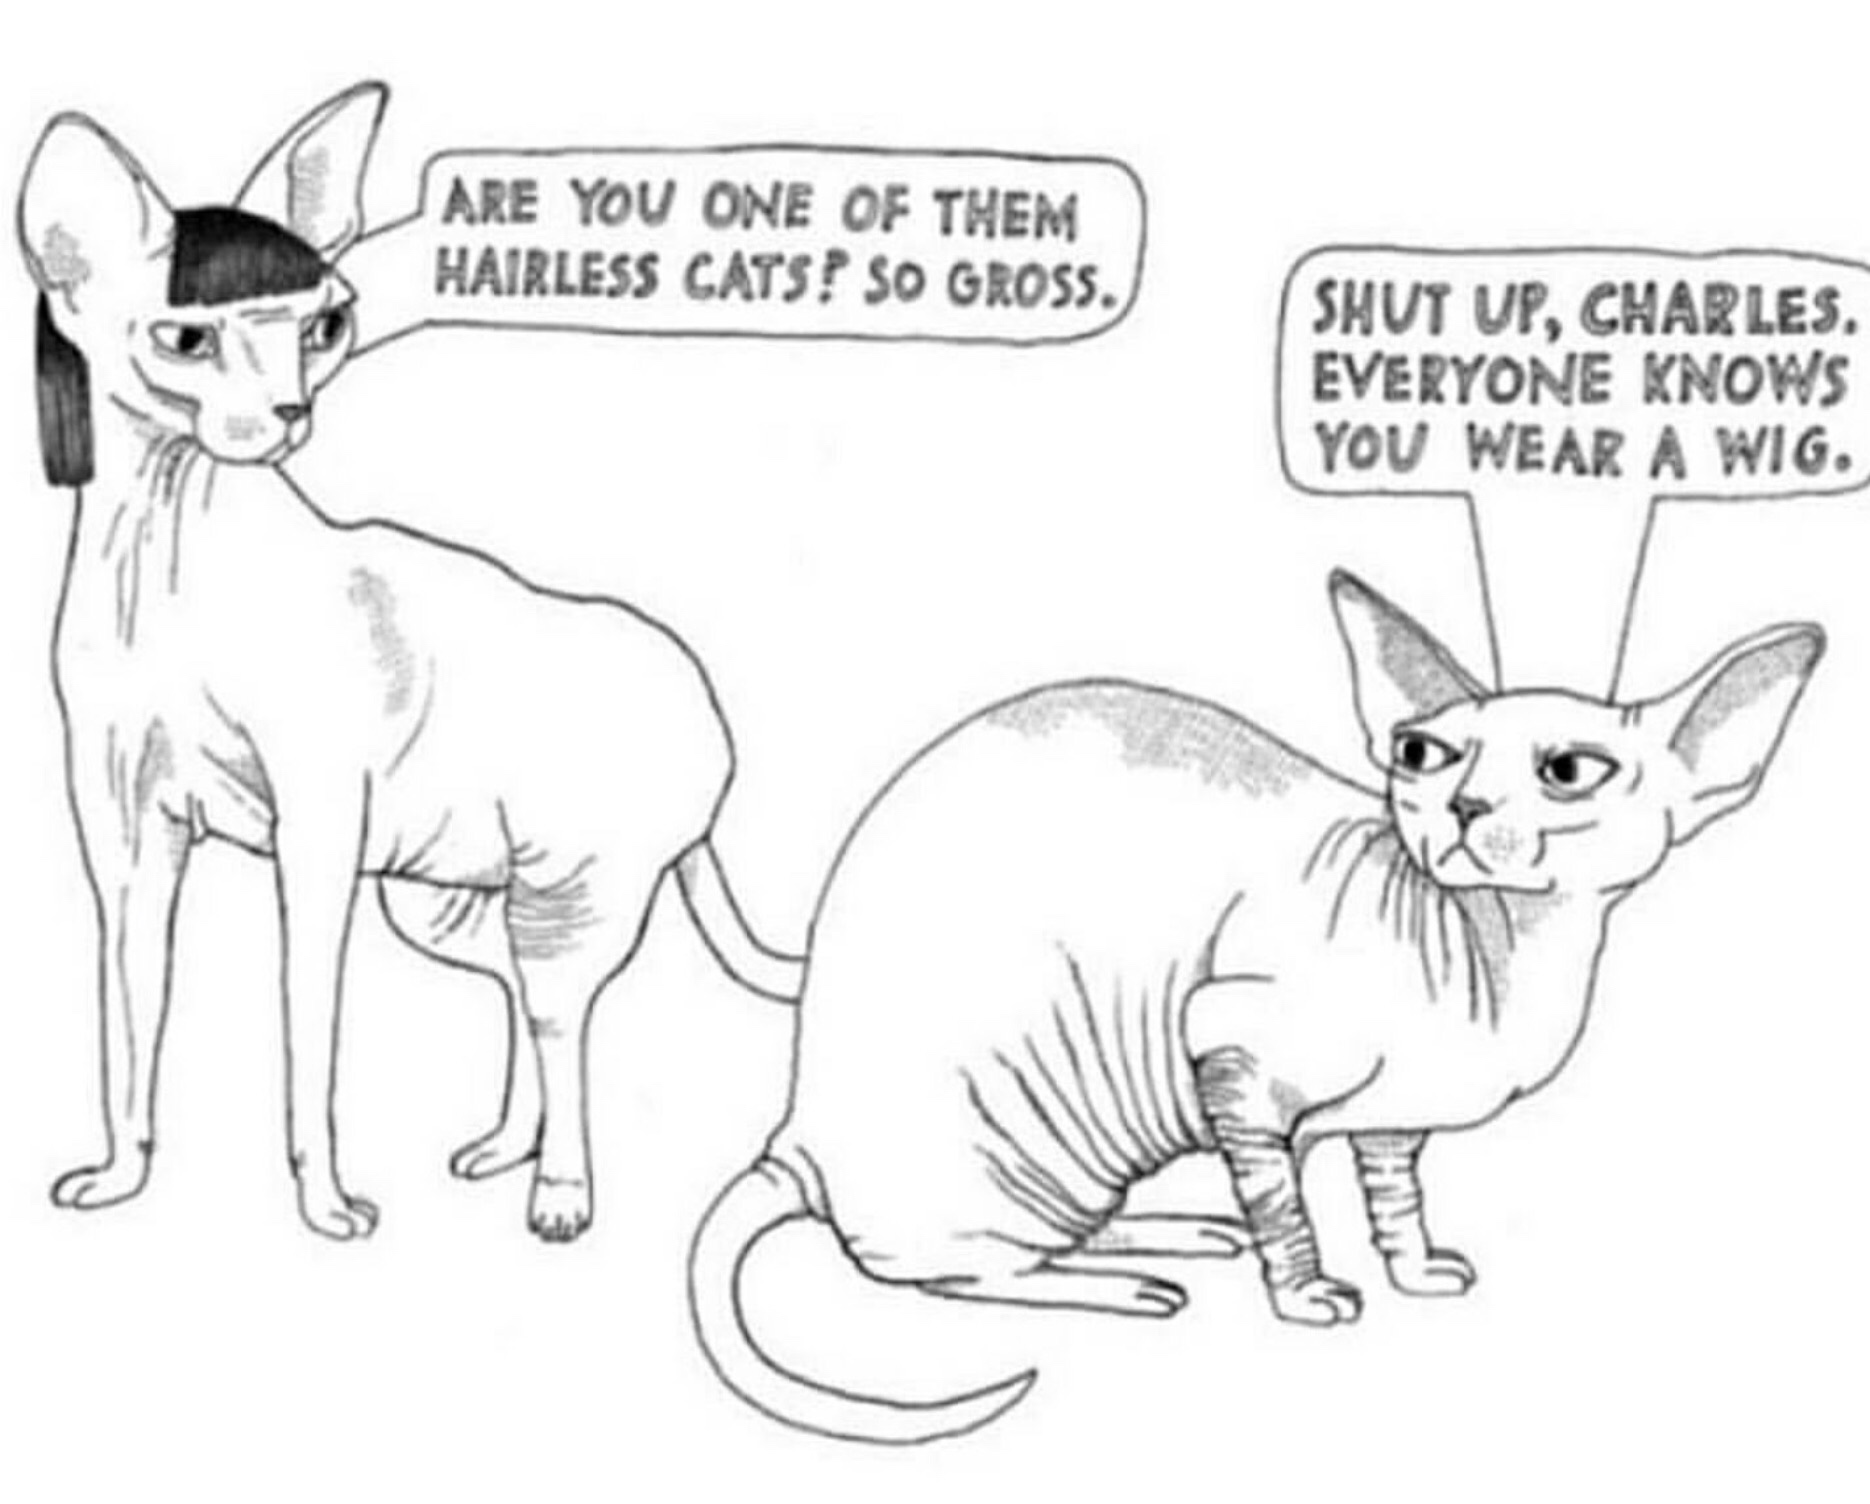 cartoon sphynx cat - Are You One Of Them Hairless Cats? So Gross. Shut Up, Charles. Everyone Knows You Wear A Wig.